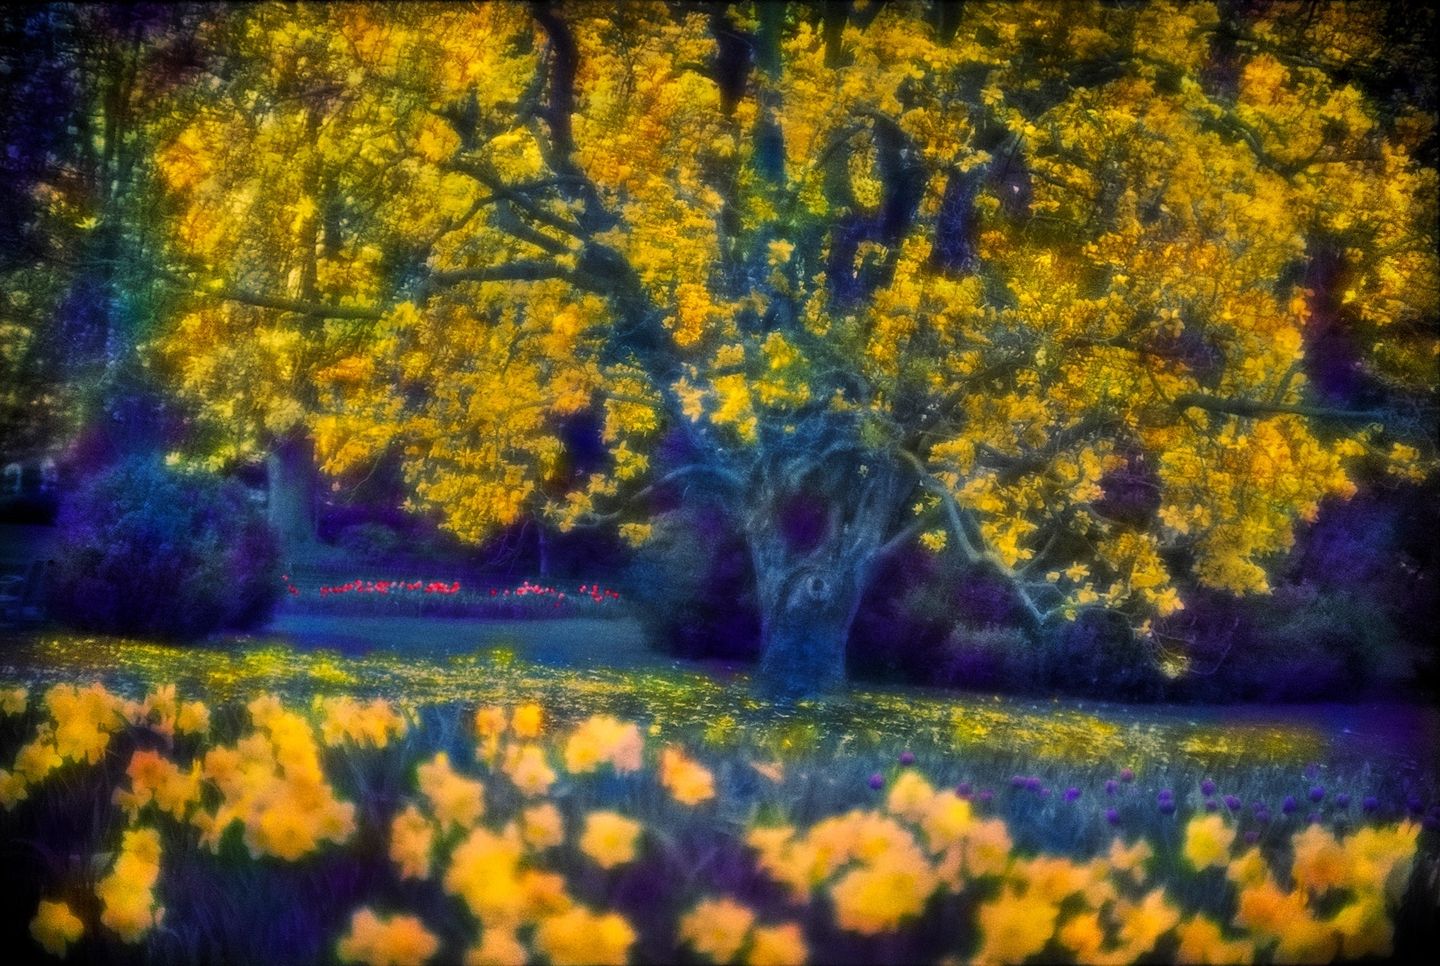 A blurry photo of trees and flowers in the background.